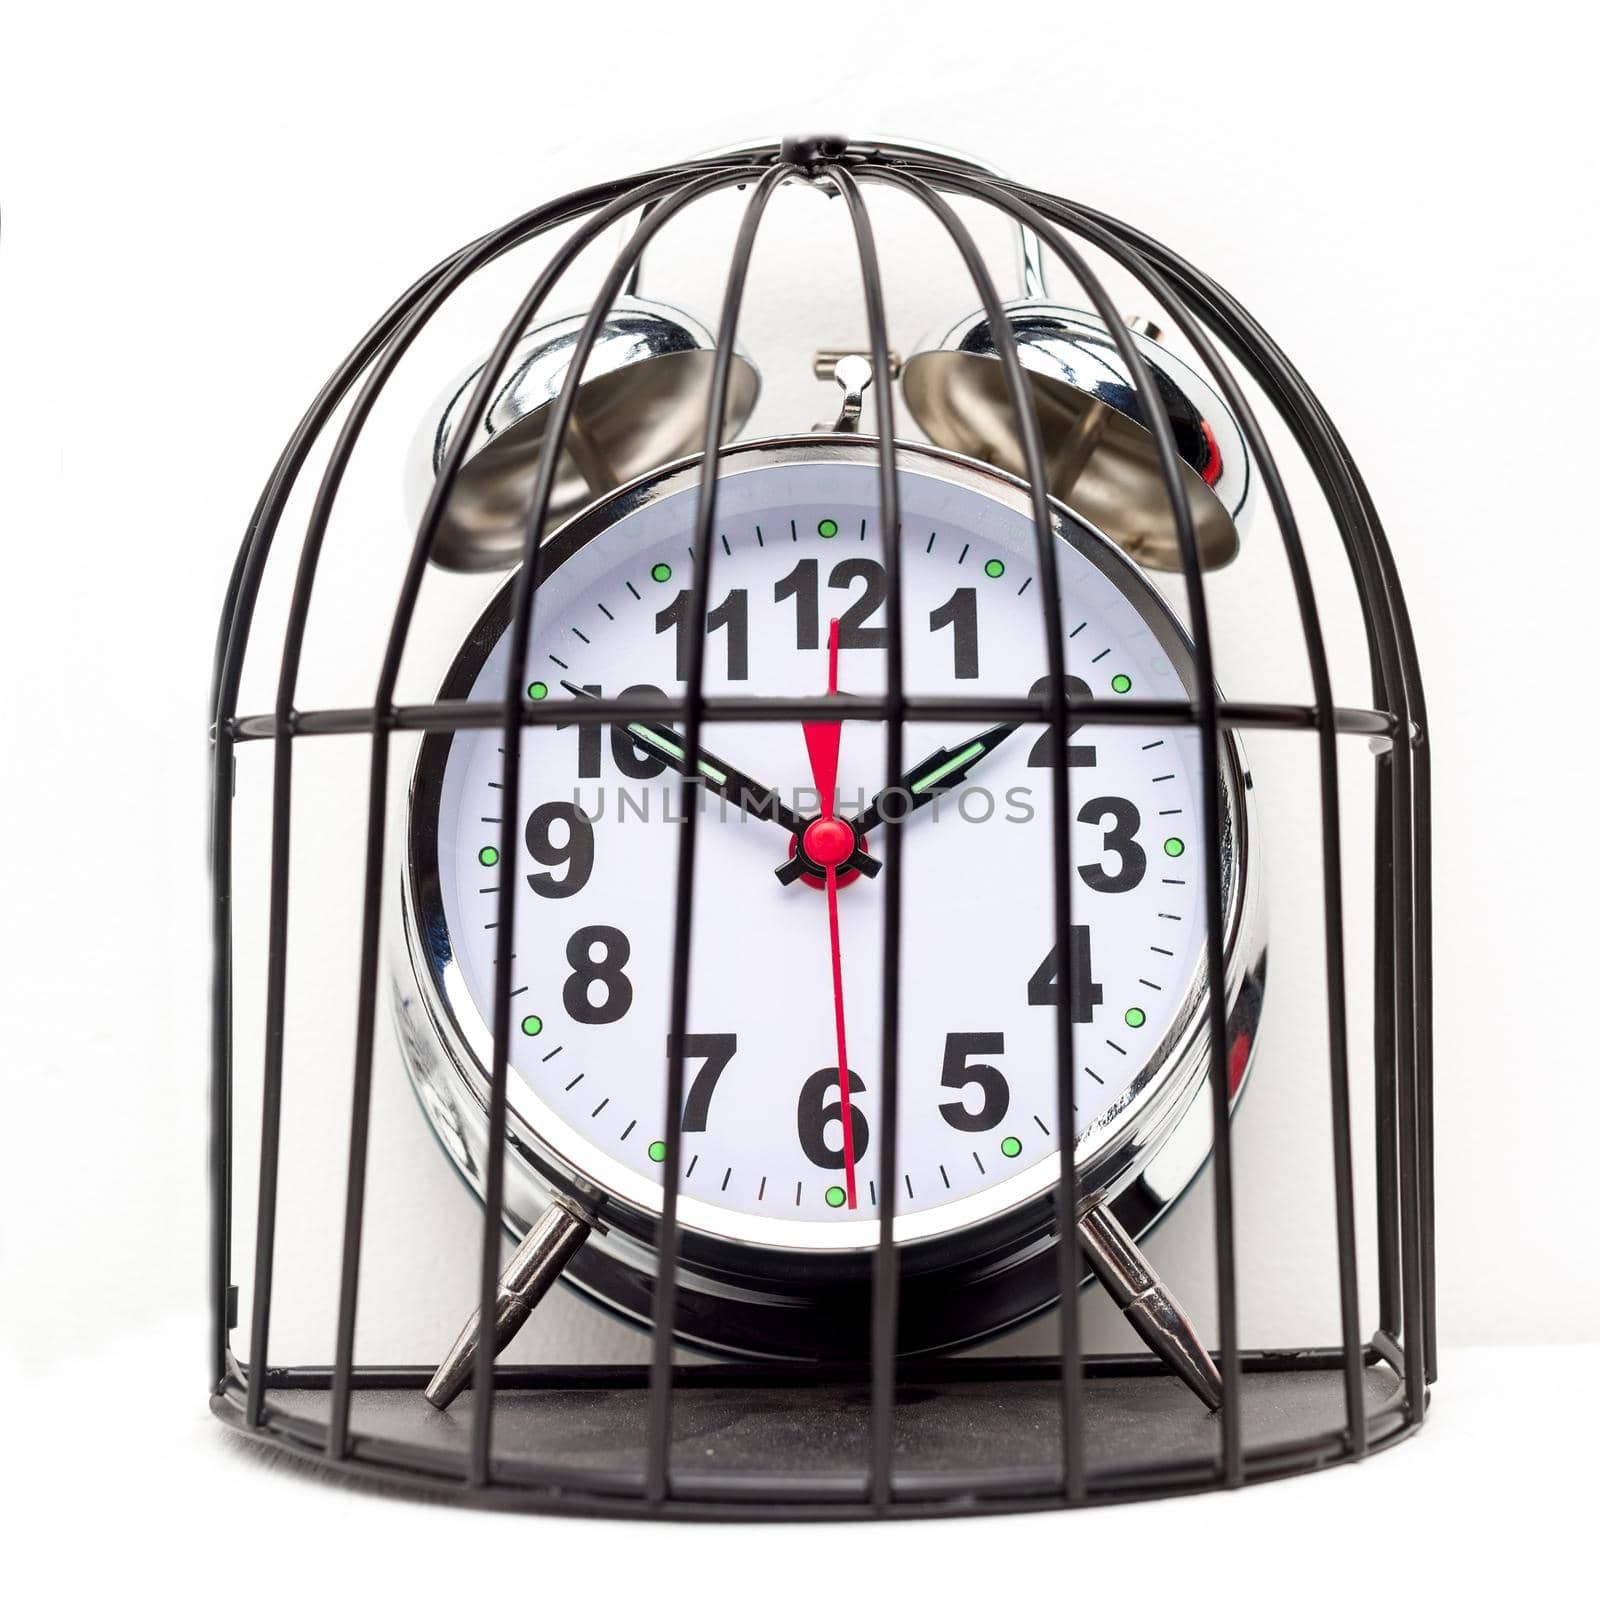 Concept of imprisonment. Alarm clock locked in a cage. - image